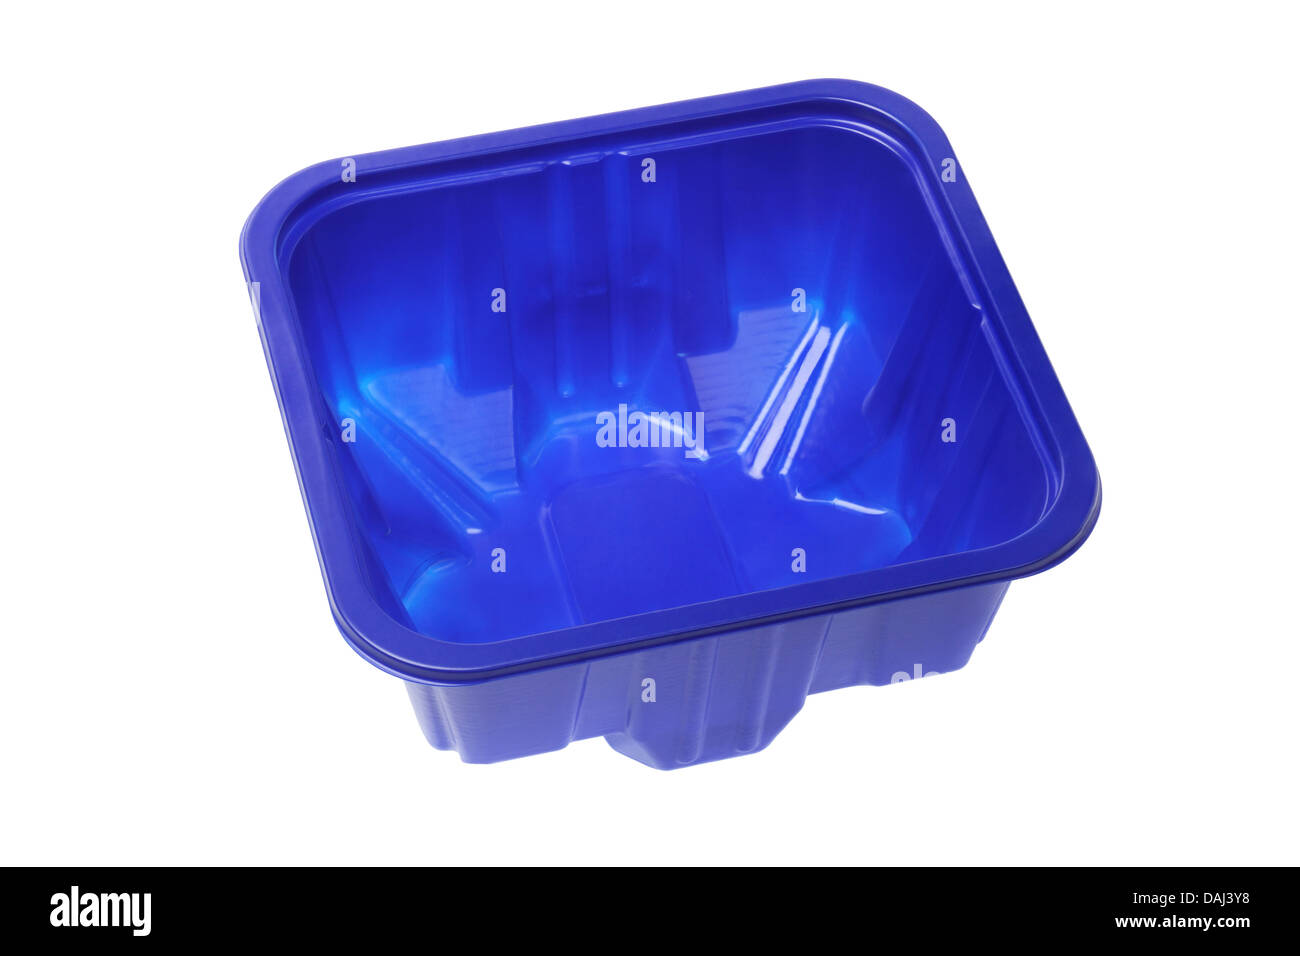 Blue Empty Plastic Container On White Background Stock Photo